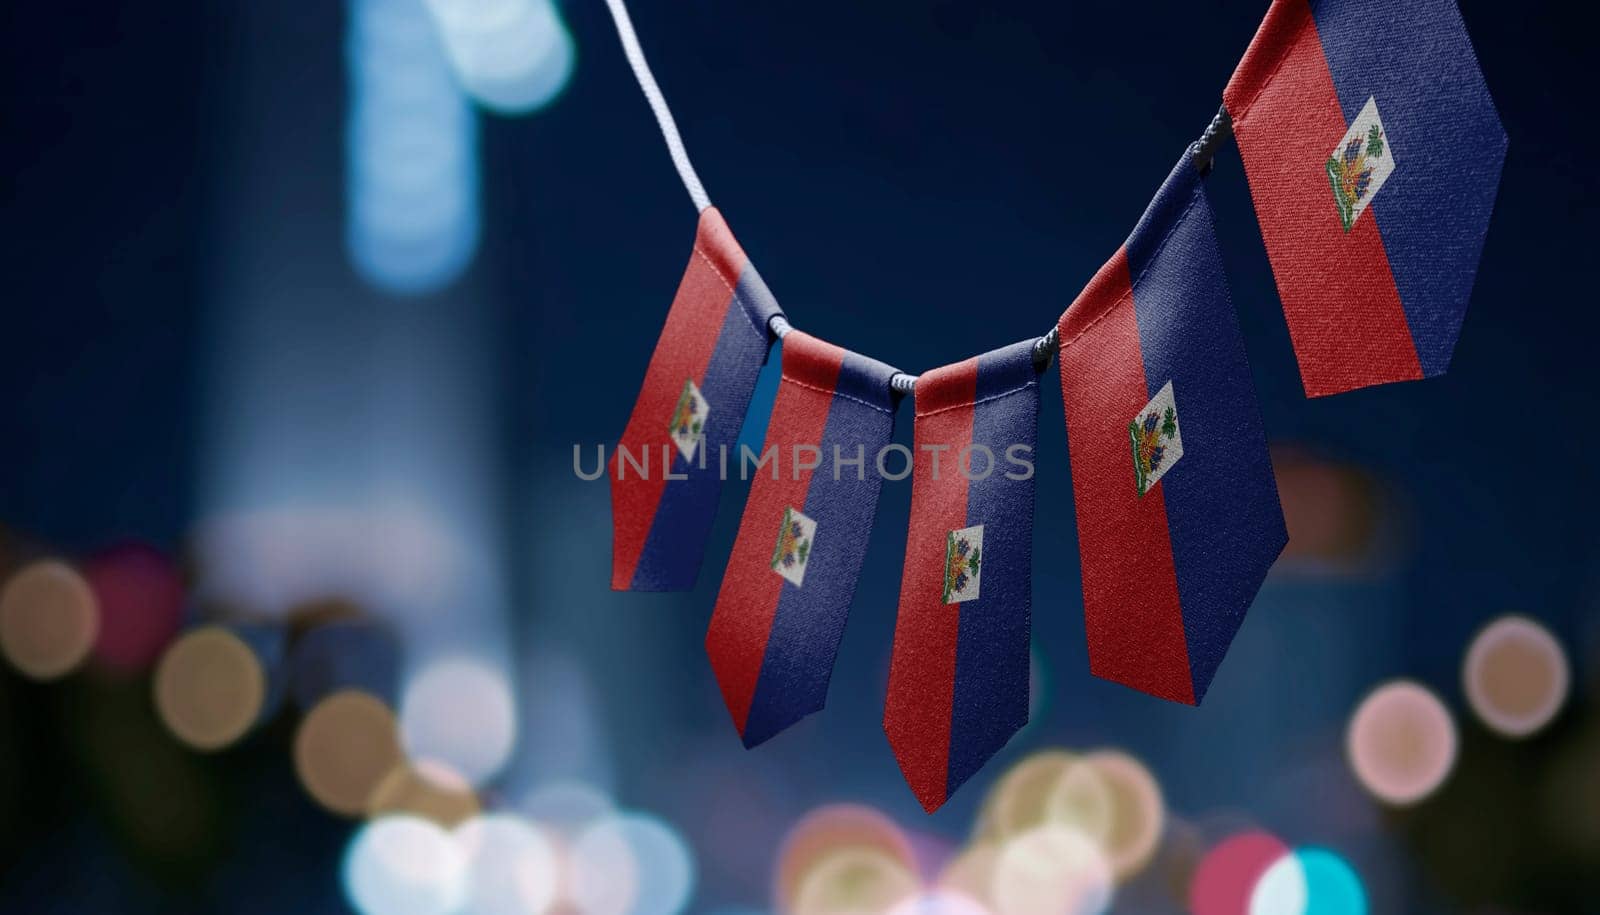 A garland of Haiti national flags on an abstract blurred background.